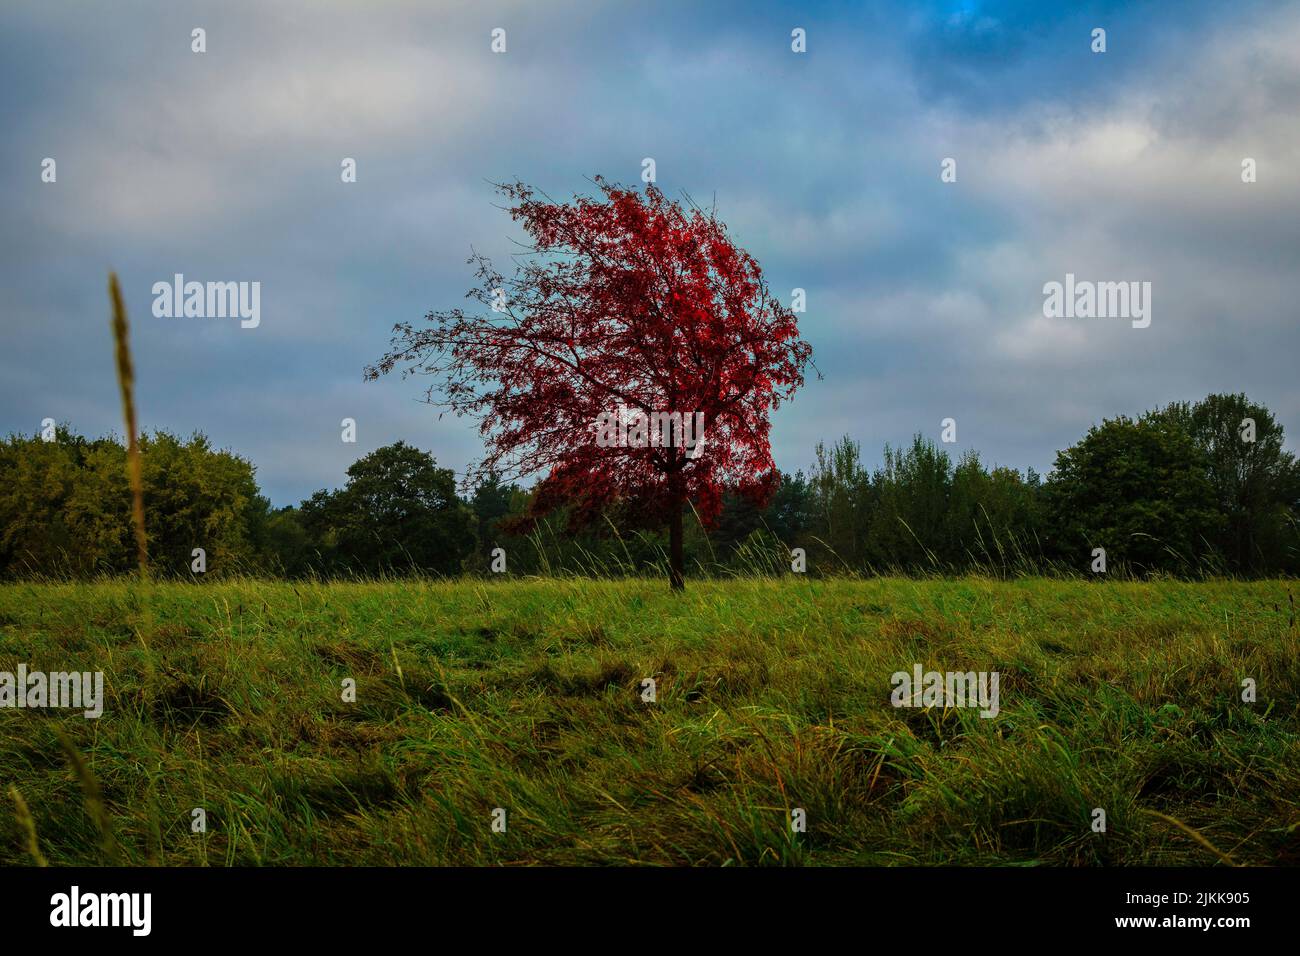 A lone autumnal tree in a middle of a field under a cloudy sky in the countryside Stock Photo